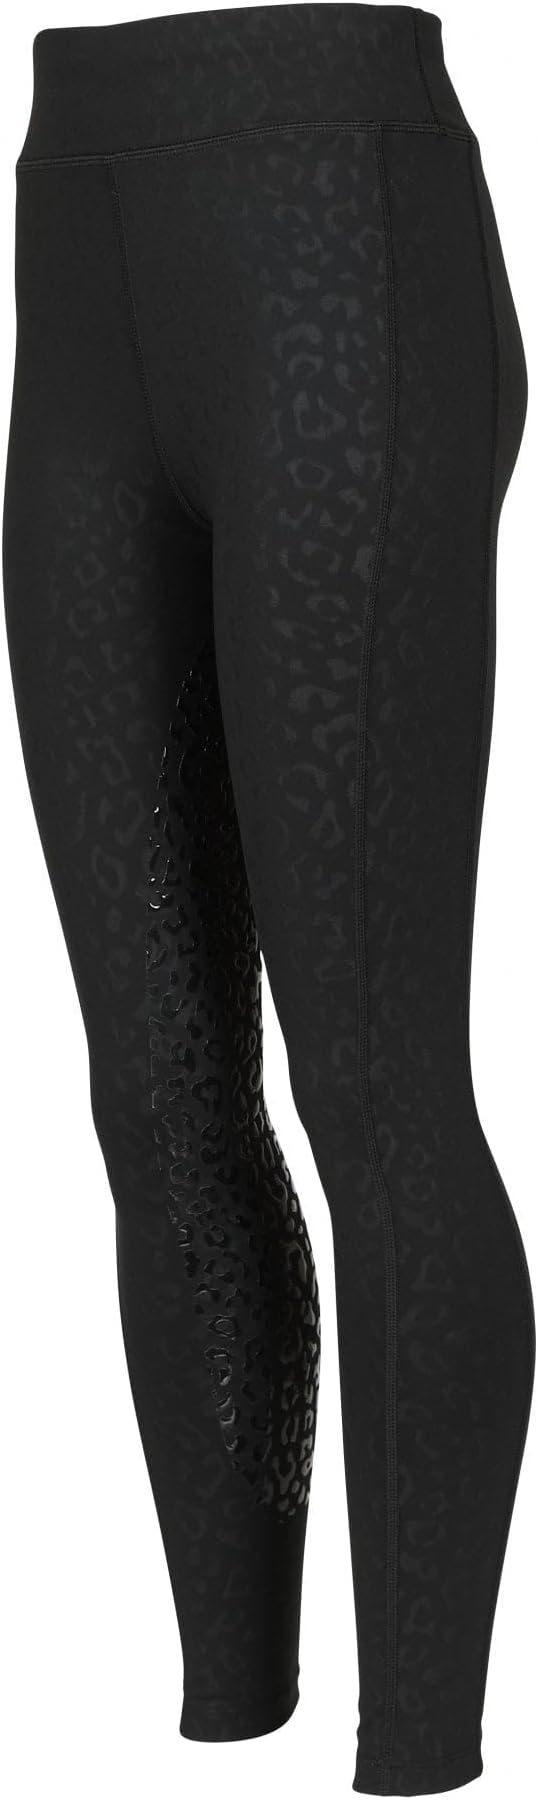 Shires Aubrion Non-Stop Tights - Young Rider #8971